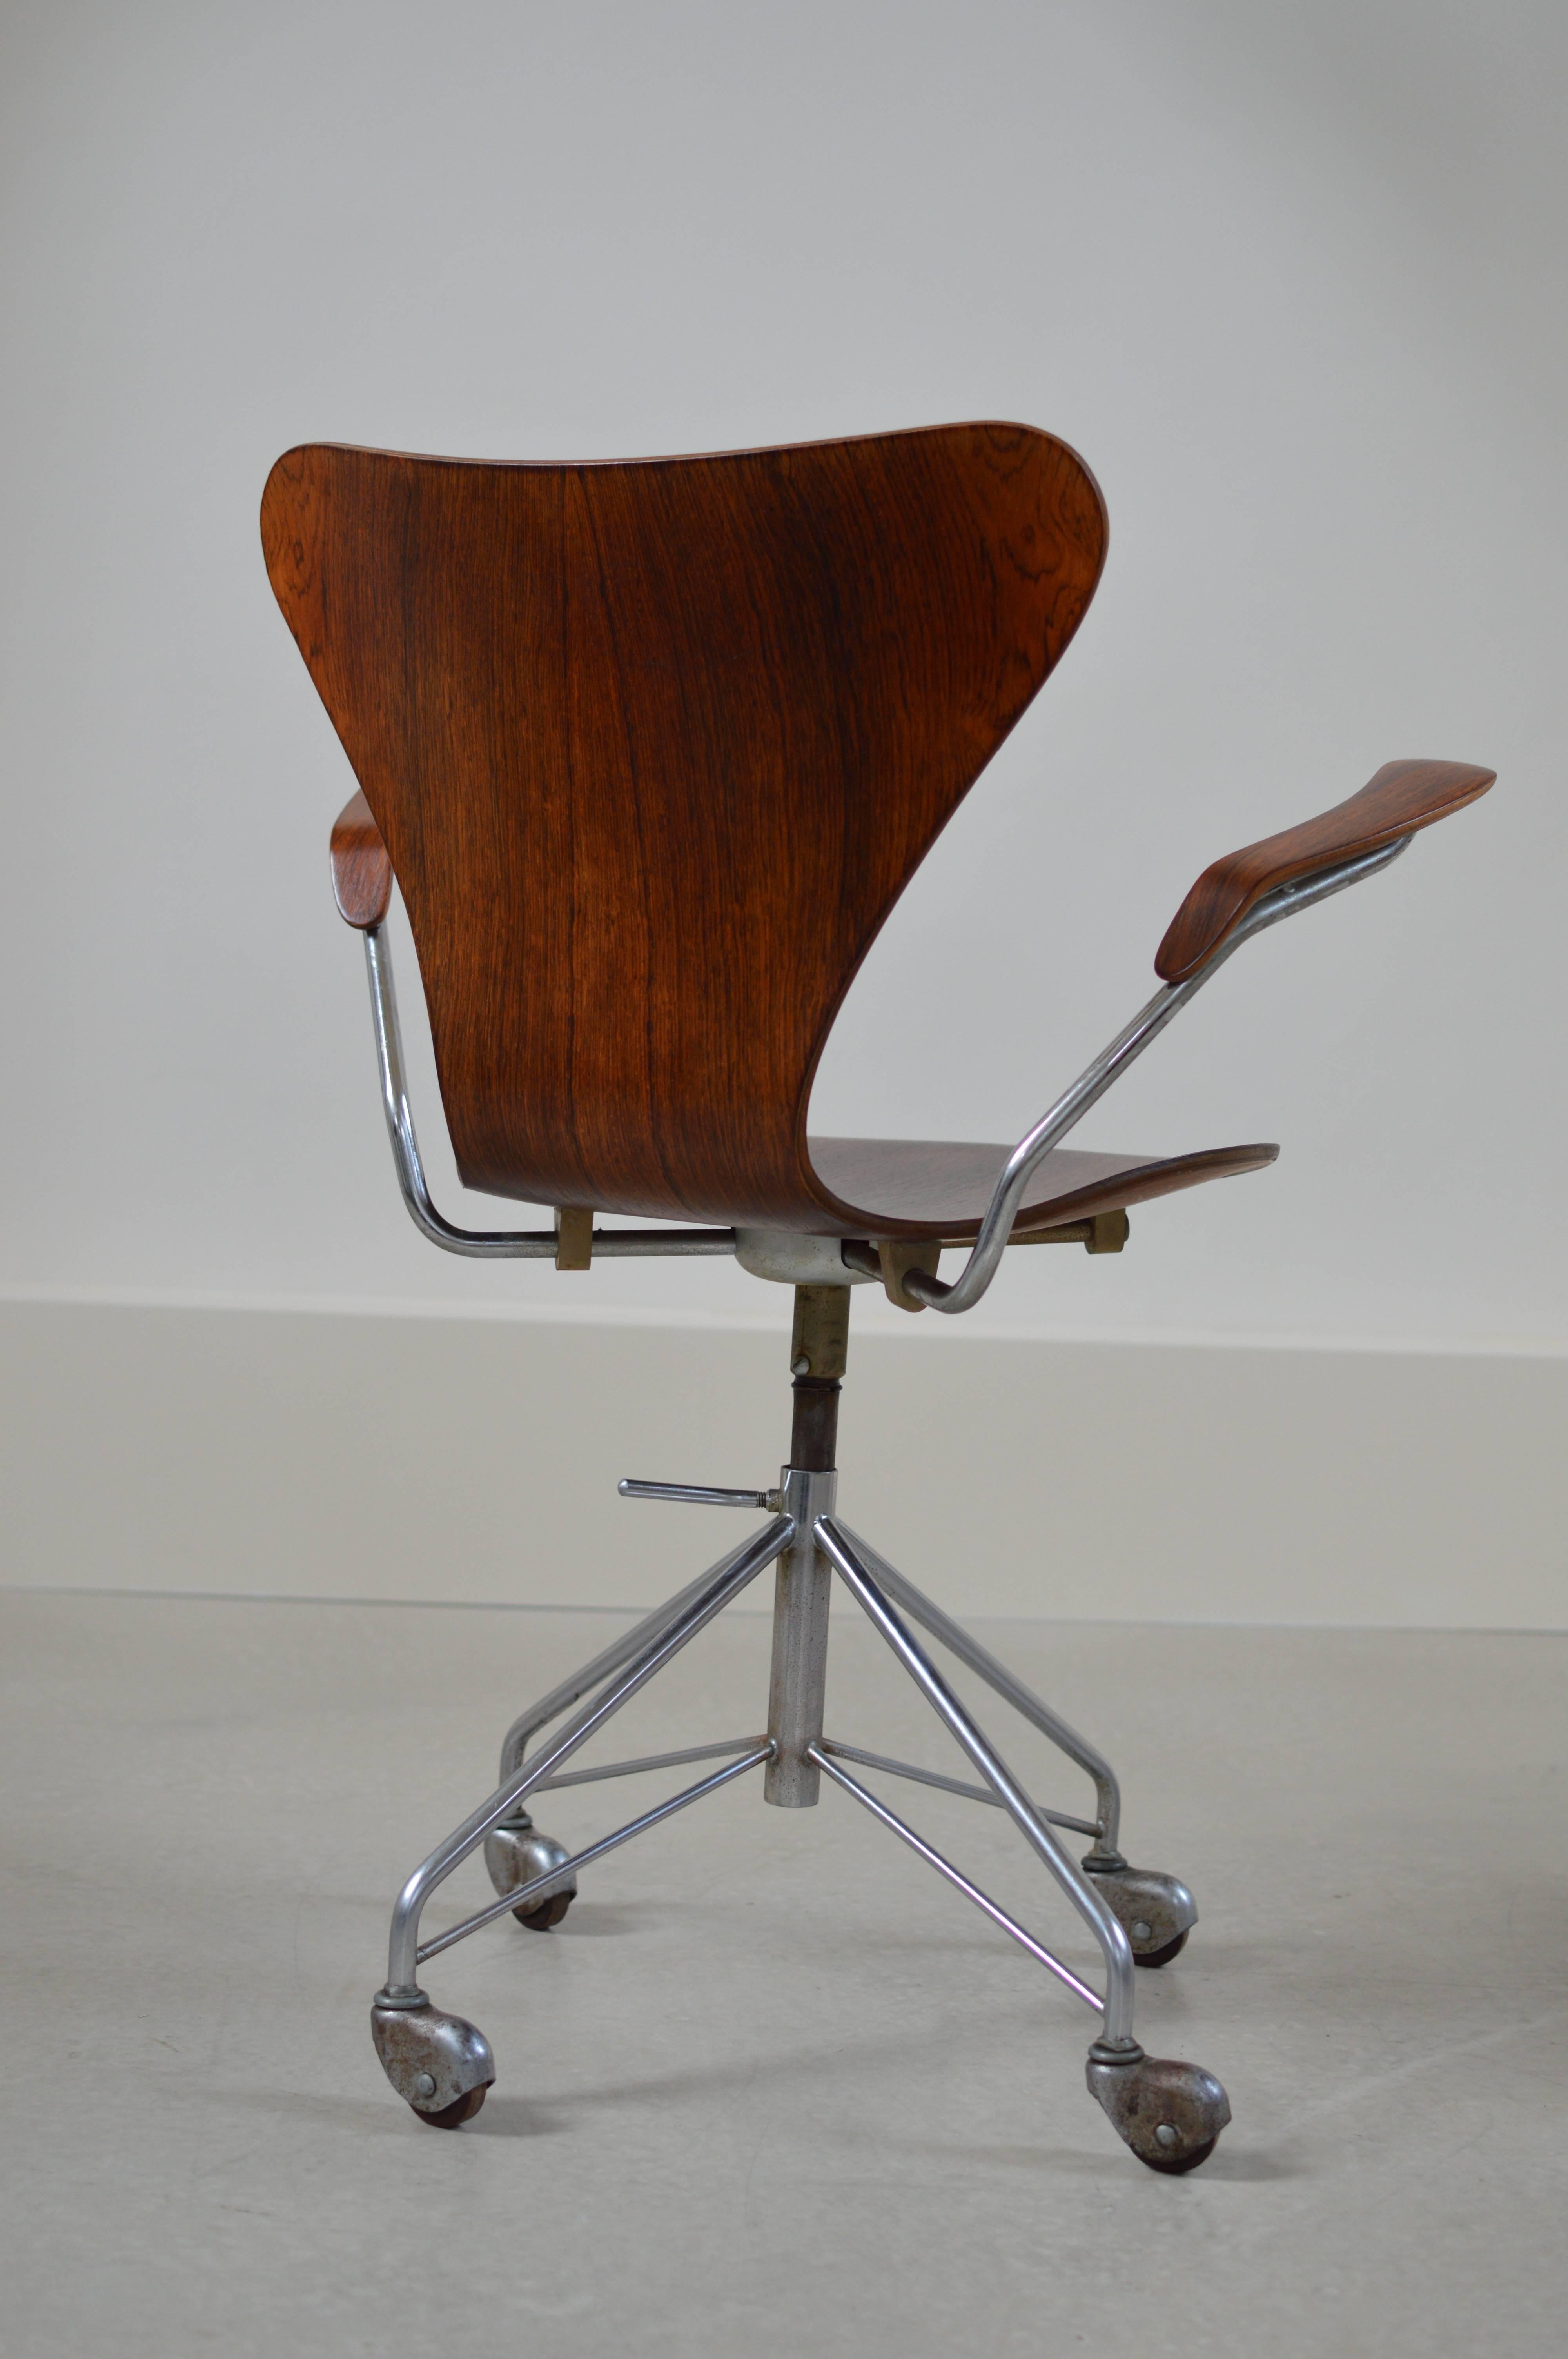 Danish Rare First Production Series Rosewood Arne Jacobsen Desk Chair